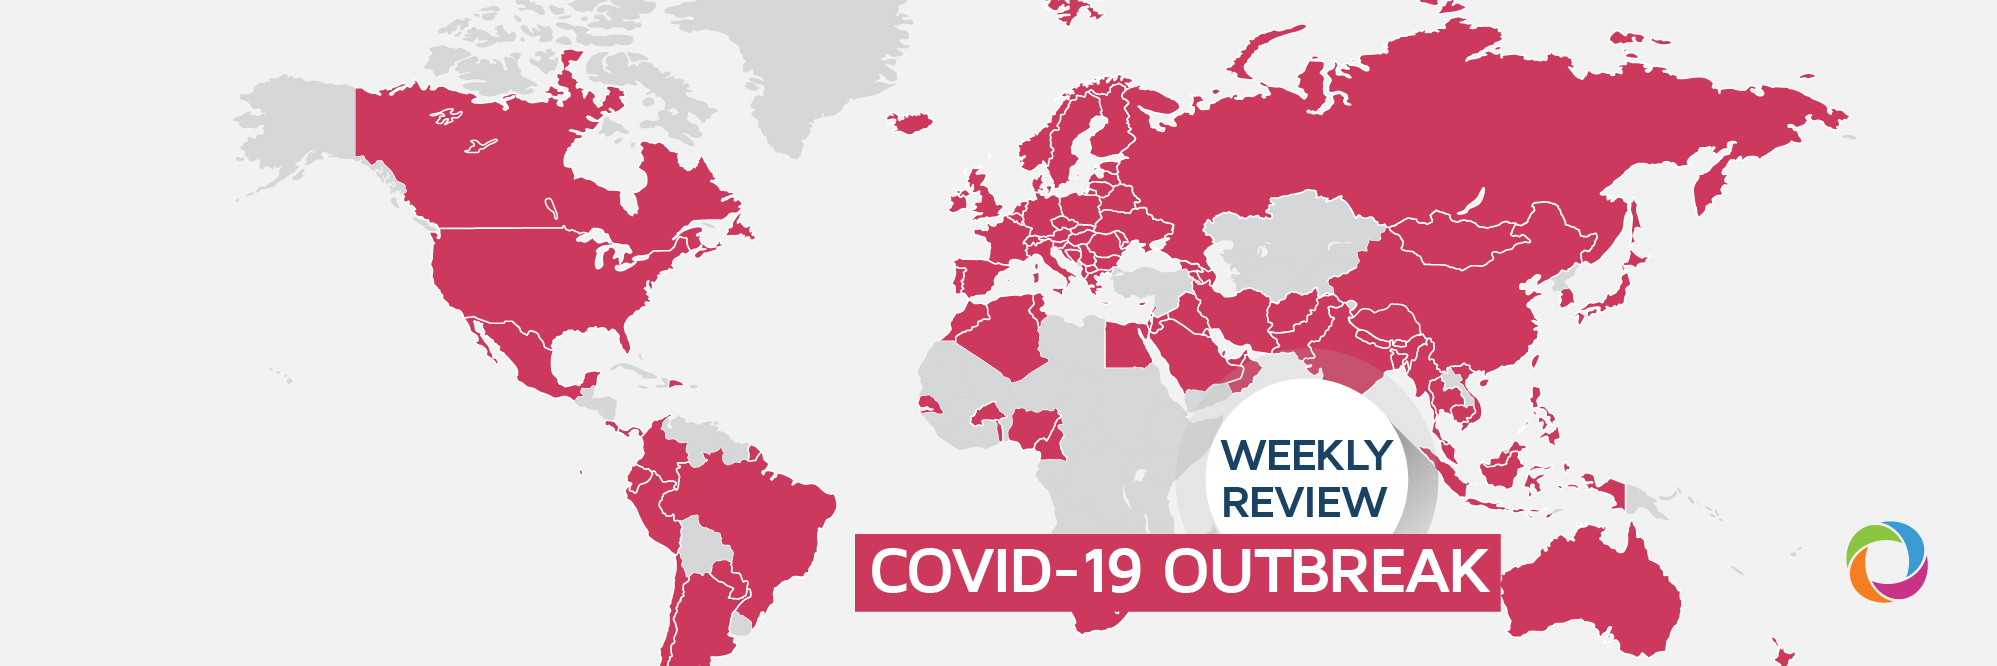 COVID-19 outbreak: Closed schools, billion-dollar losses and half of the world countries affected